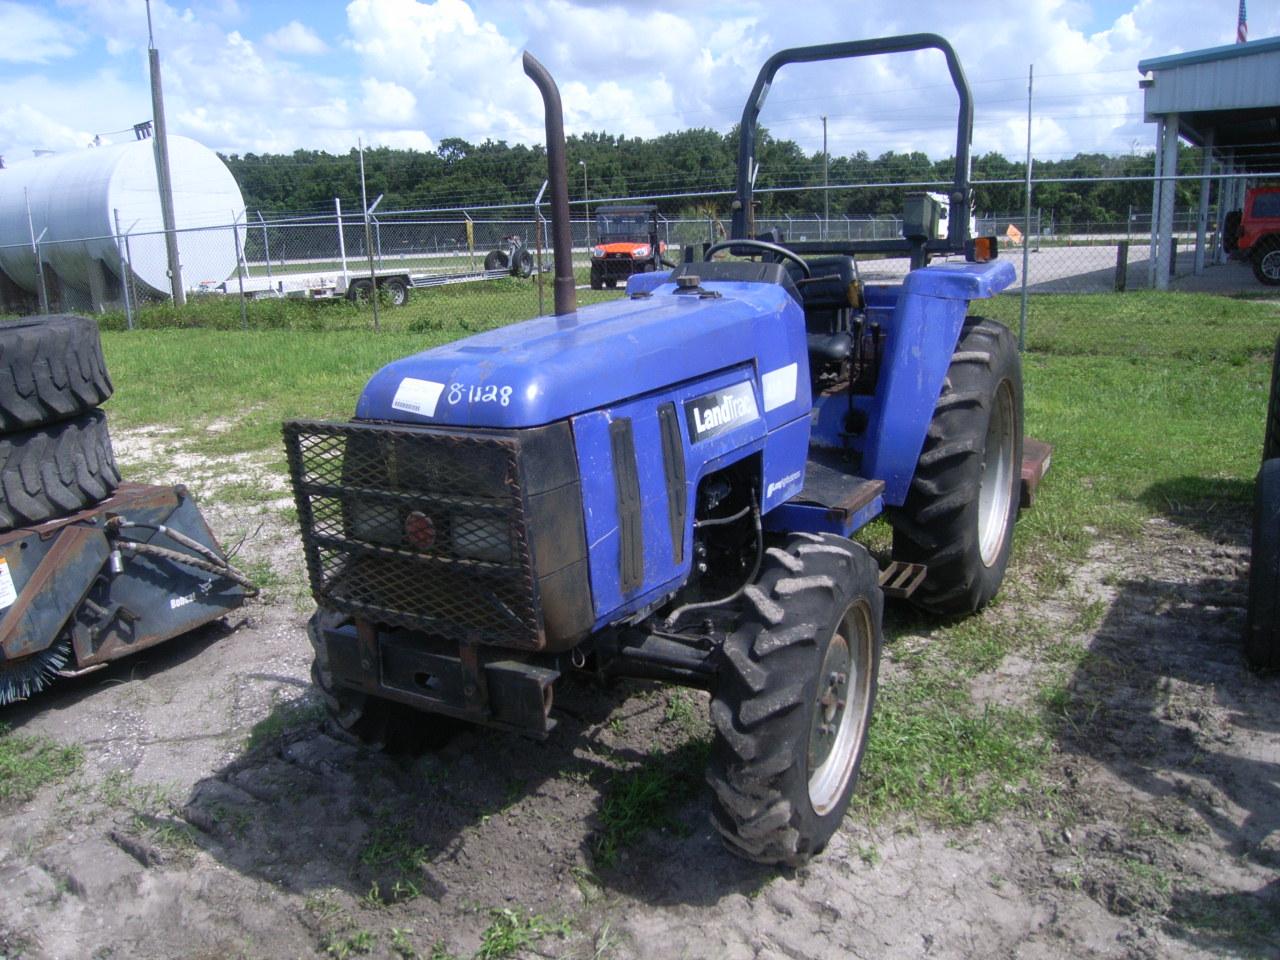 9-01132 (Equip.-Tractor)  Seller:Private/Dealer LONG AGRIBUSINESS LDT410 DTC DIESEL TRAC